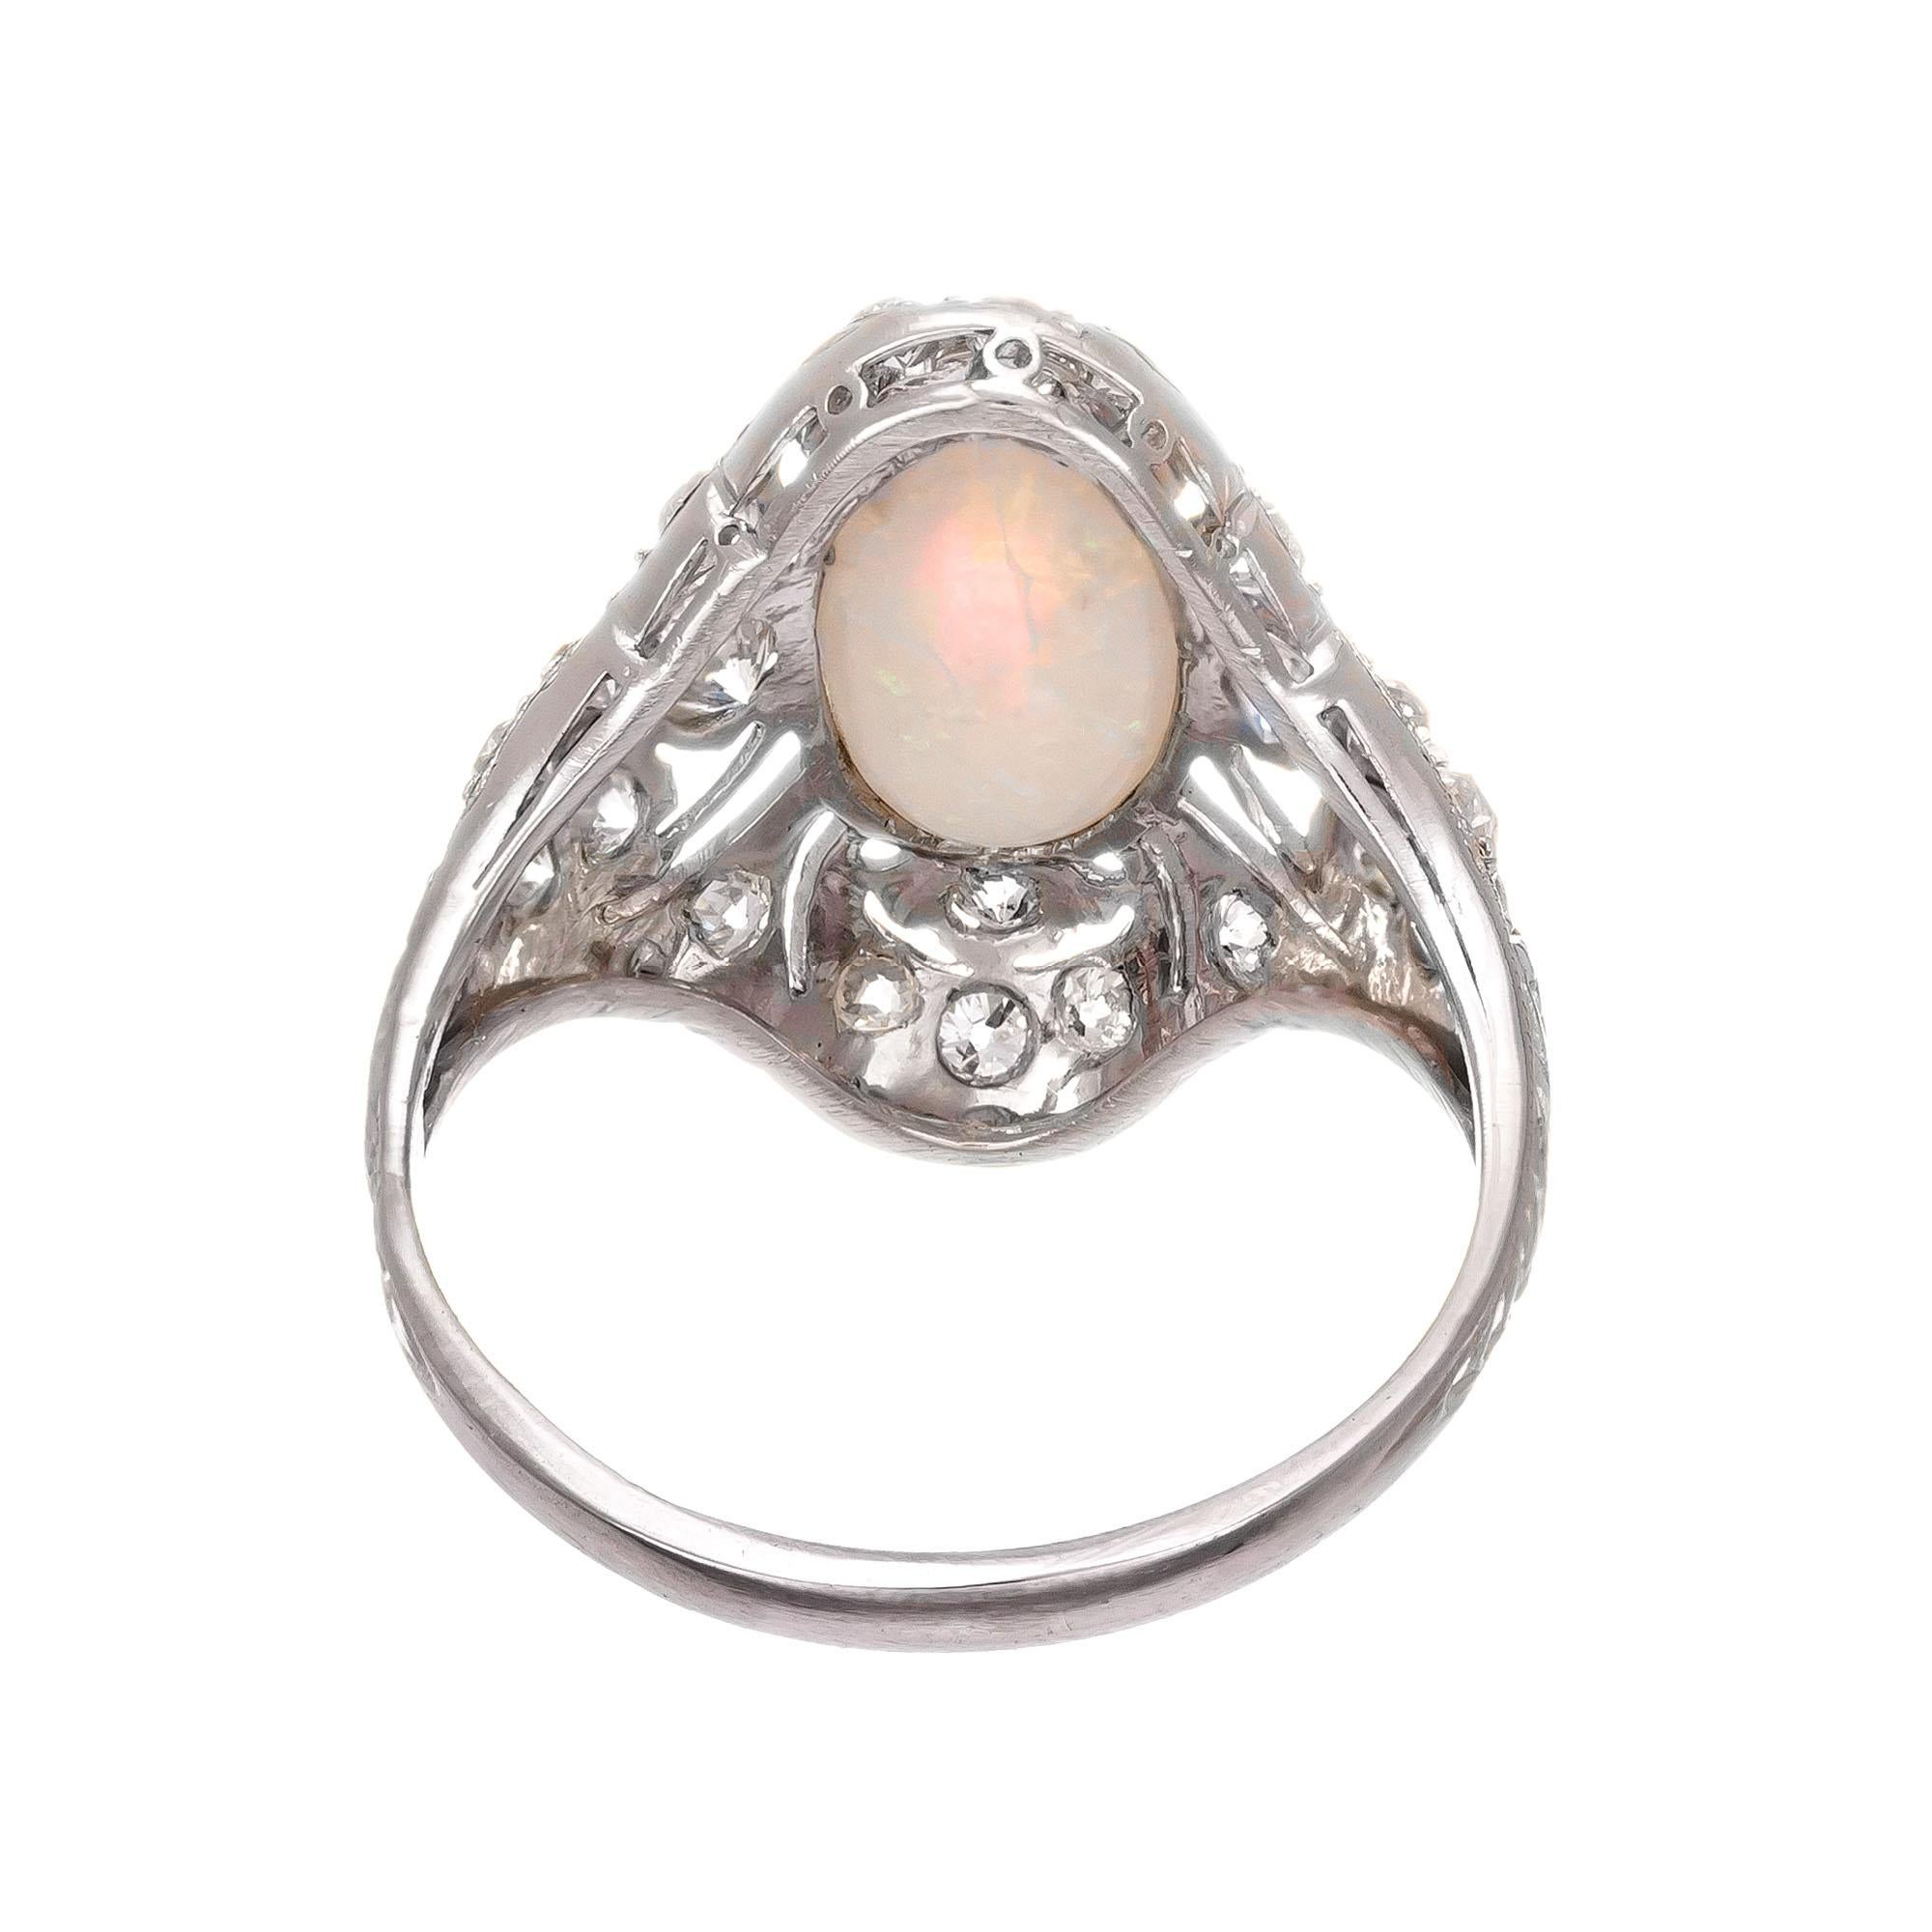 Vintage 1910 open work opal and diamond art deco platinum ring. Oval cabochon center opal with round accent diamonds in platinum.

1 oval white (green,red,blue) cabochon opal, approx.  1.02cts
22 round diamonds G-H VS-SI .46ct
Size 5.75 and sizable